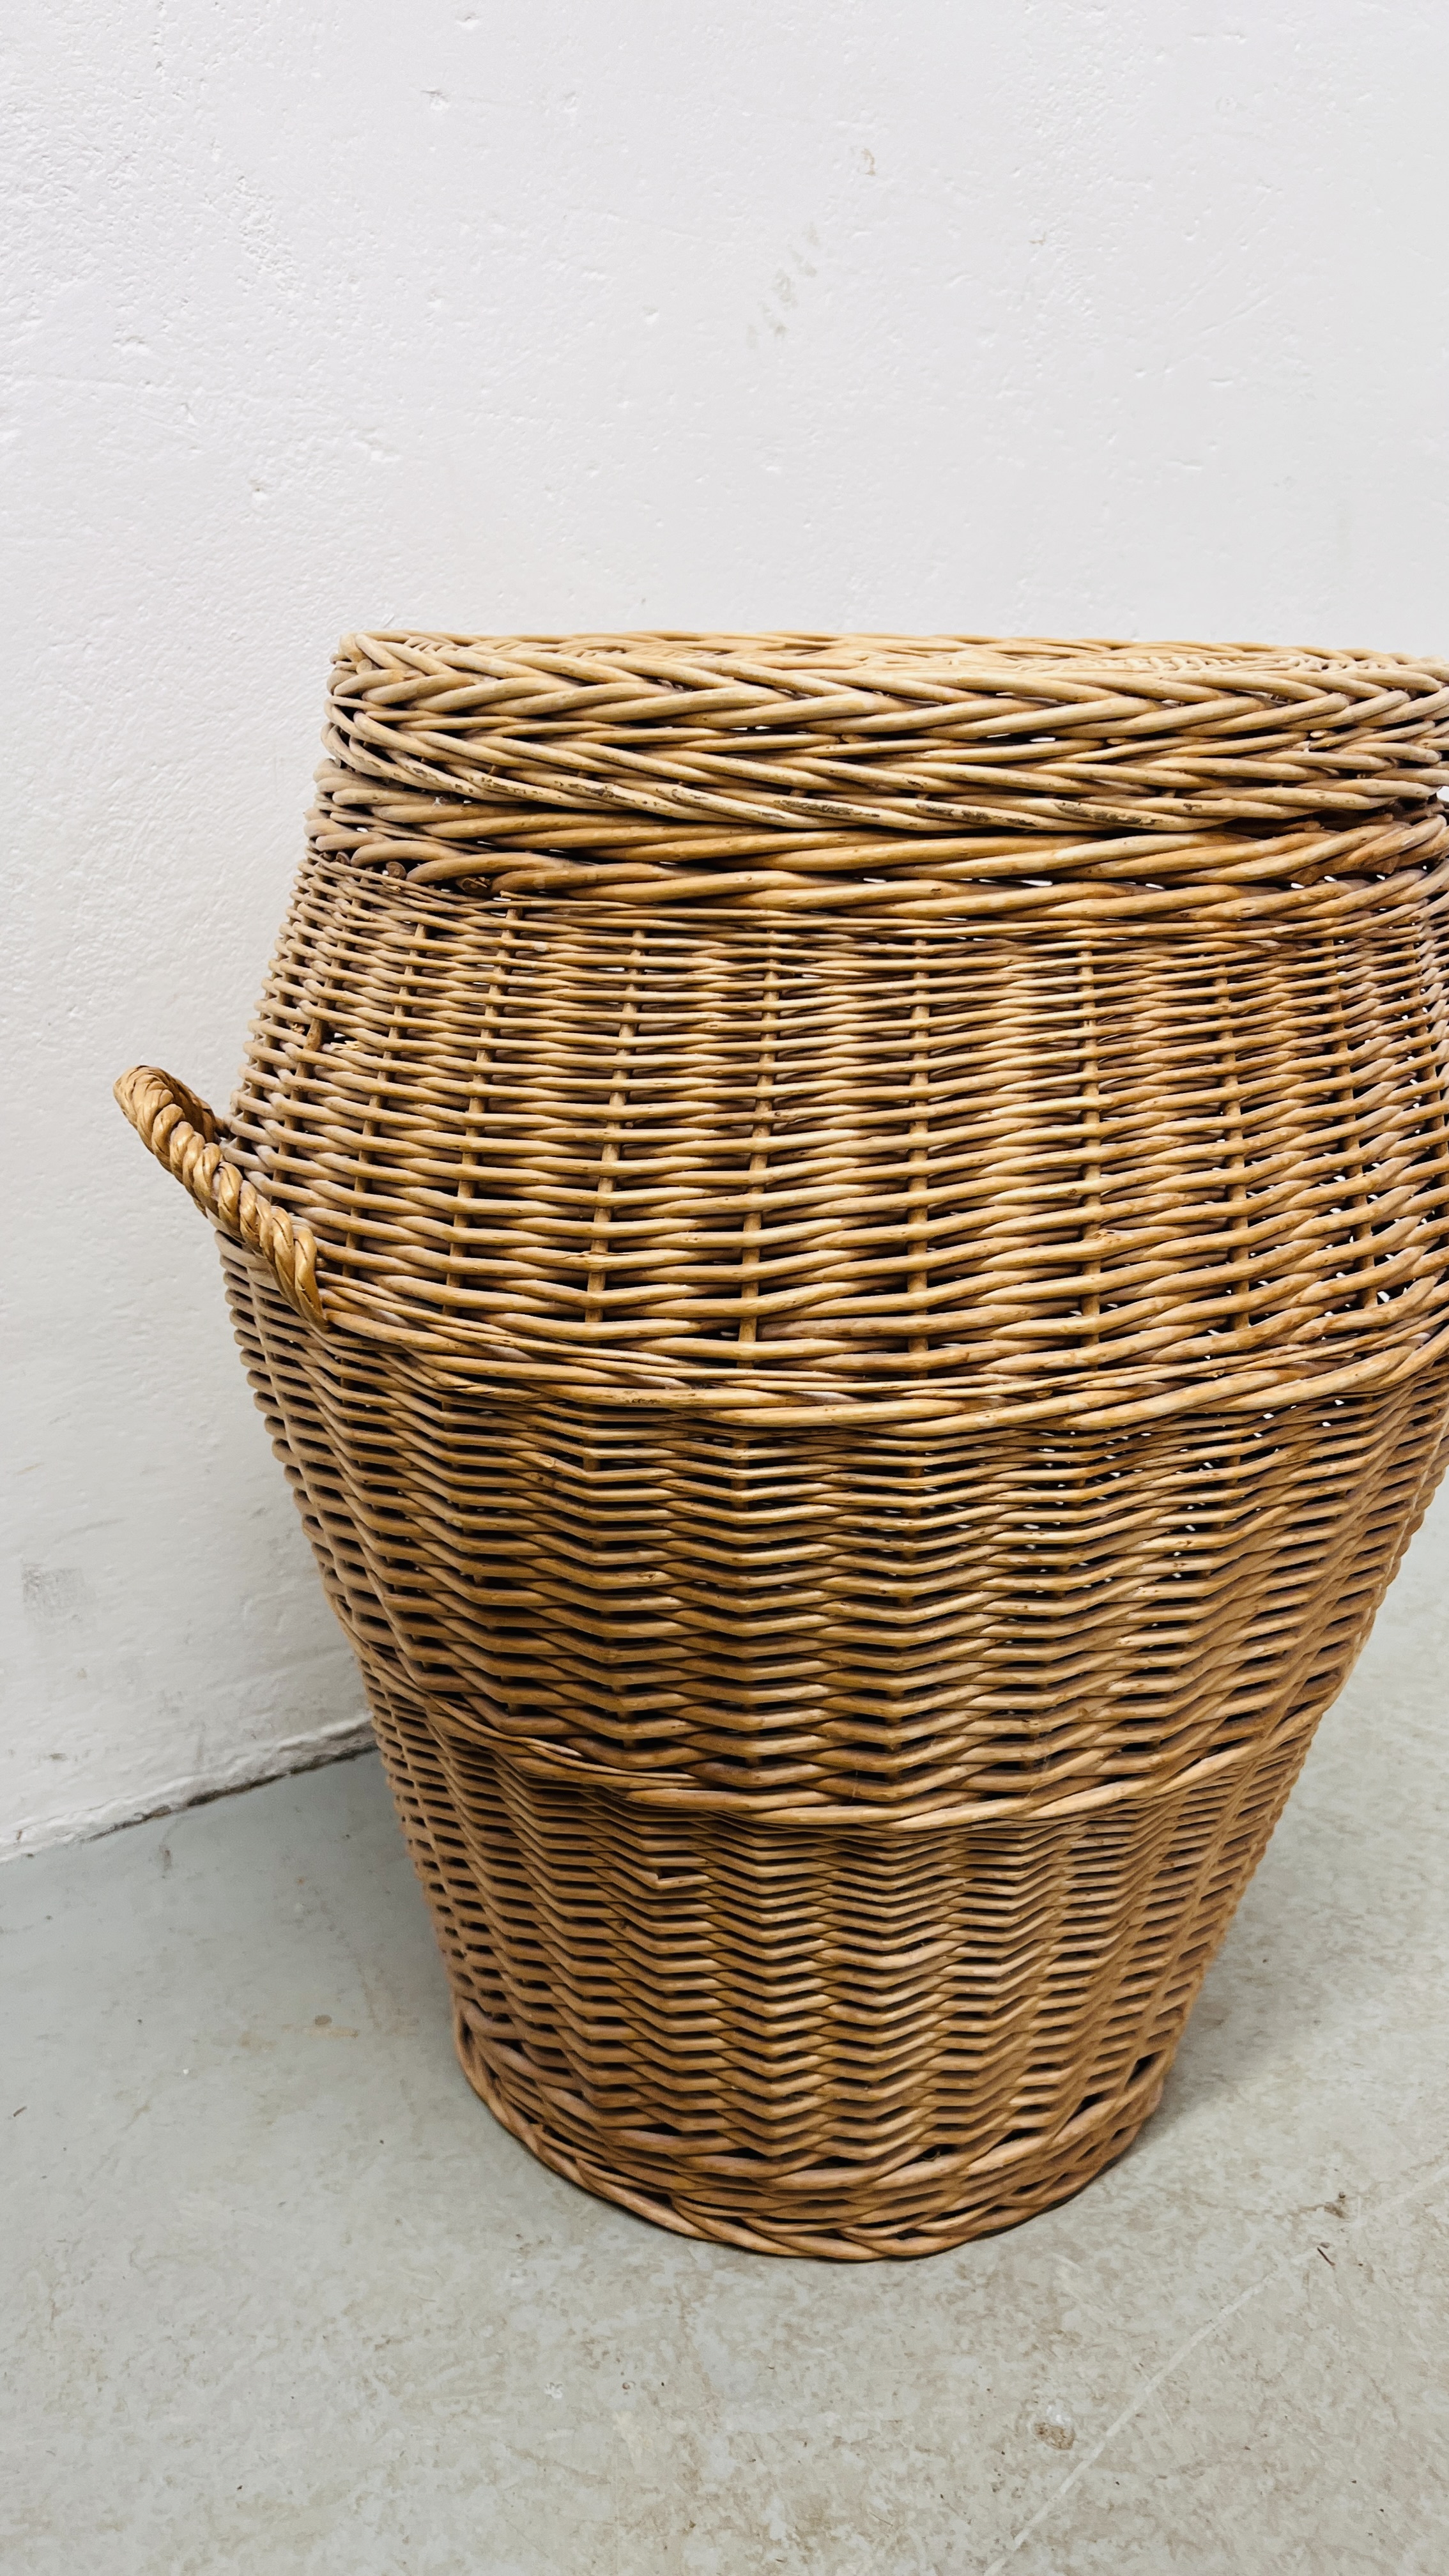 A WICKER LAUNDRY BASKET WITH LID, HEIGHT 60CM. - Image 4 of 5